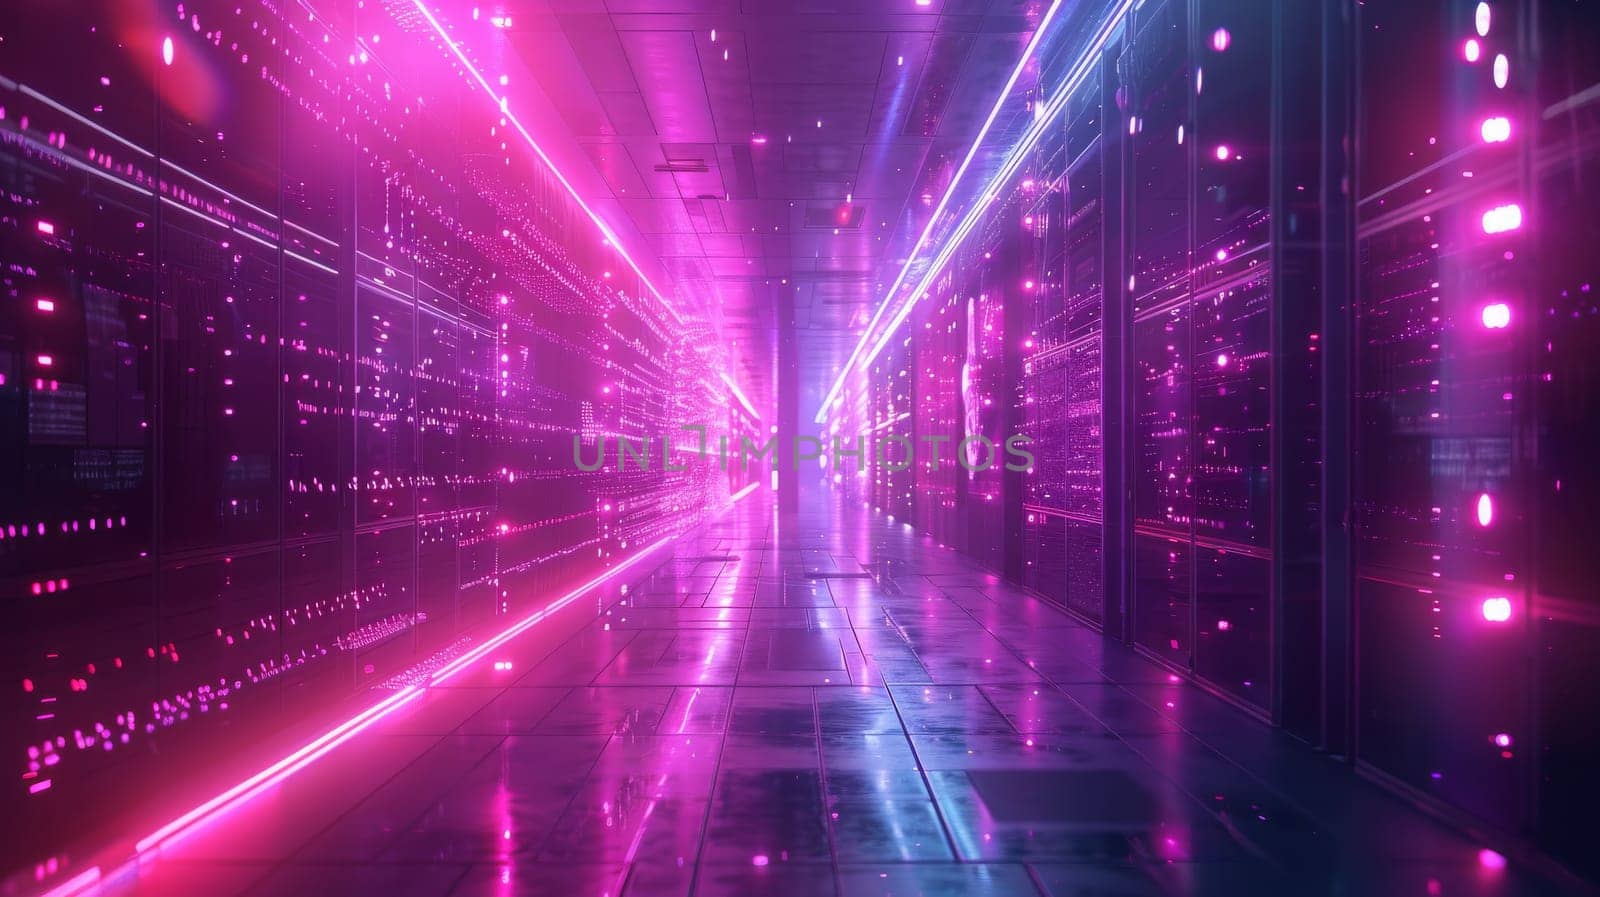 A long, narrow room with pink walls and pink lights. The room is filled with neon lights and has a futuristic feel to it